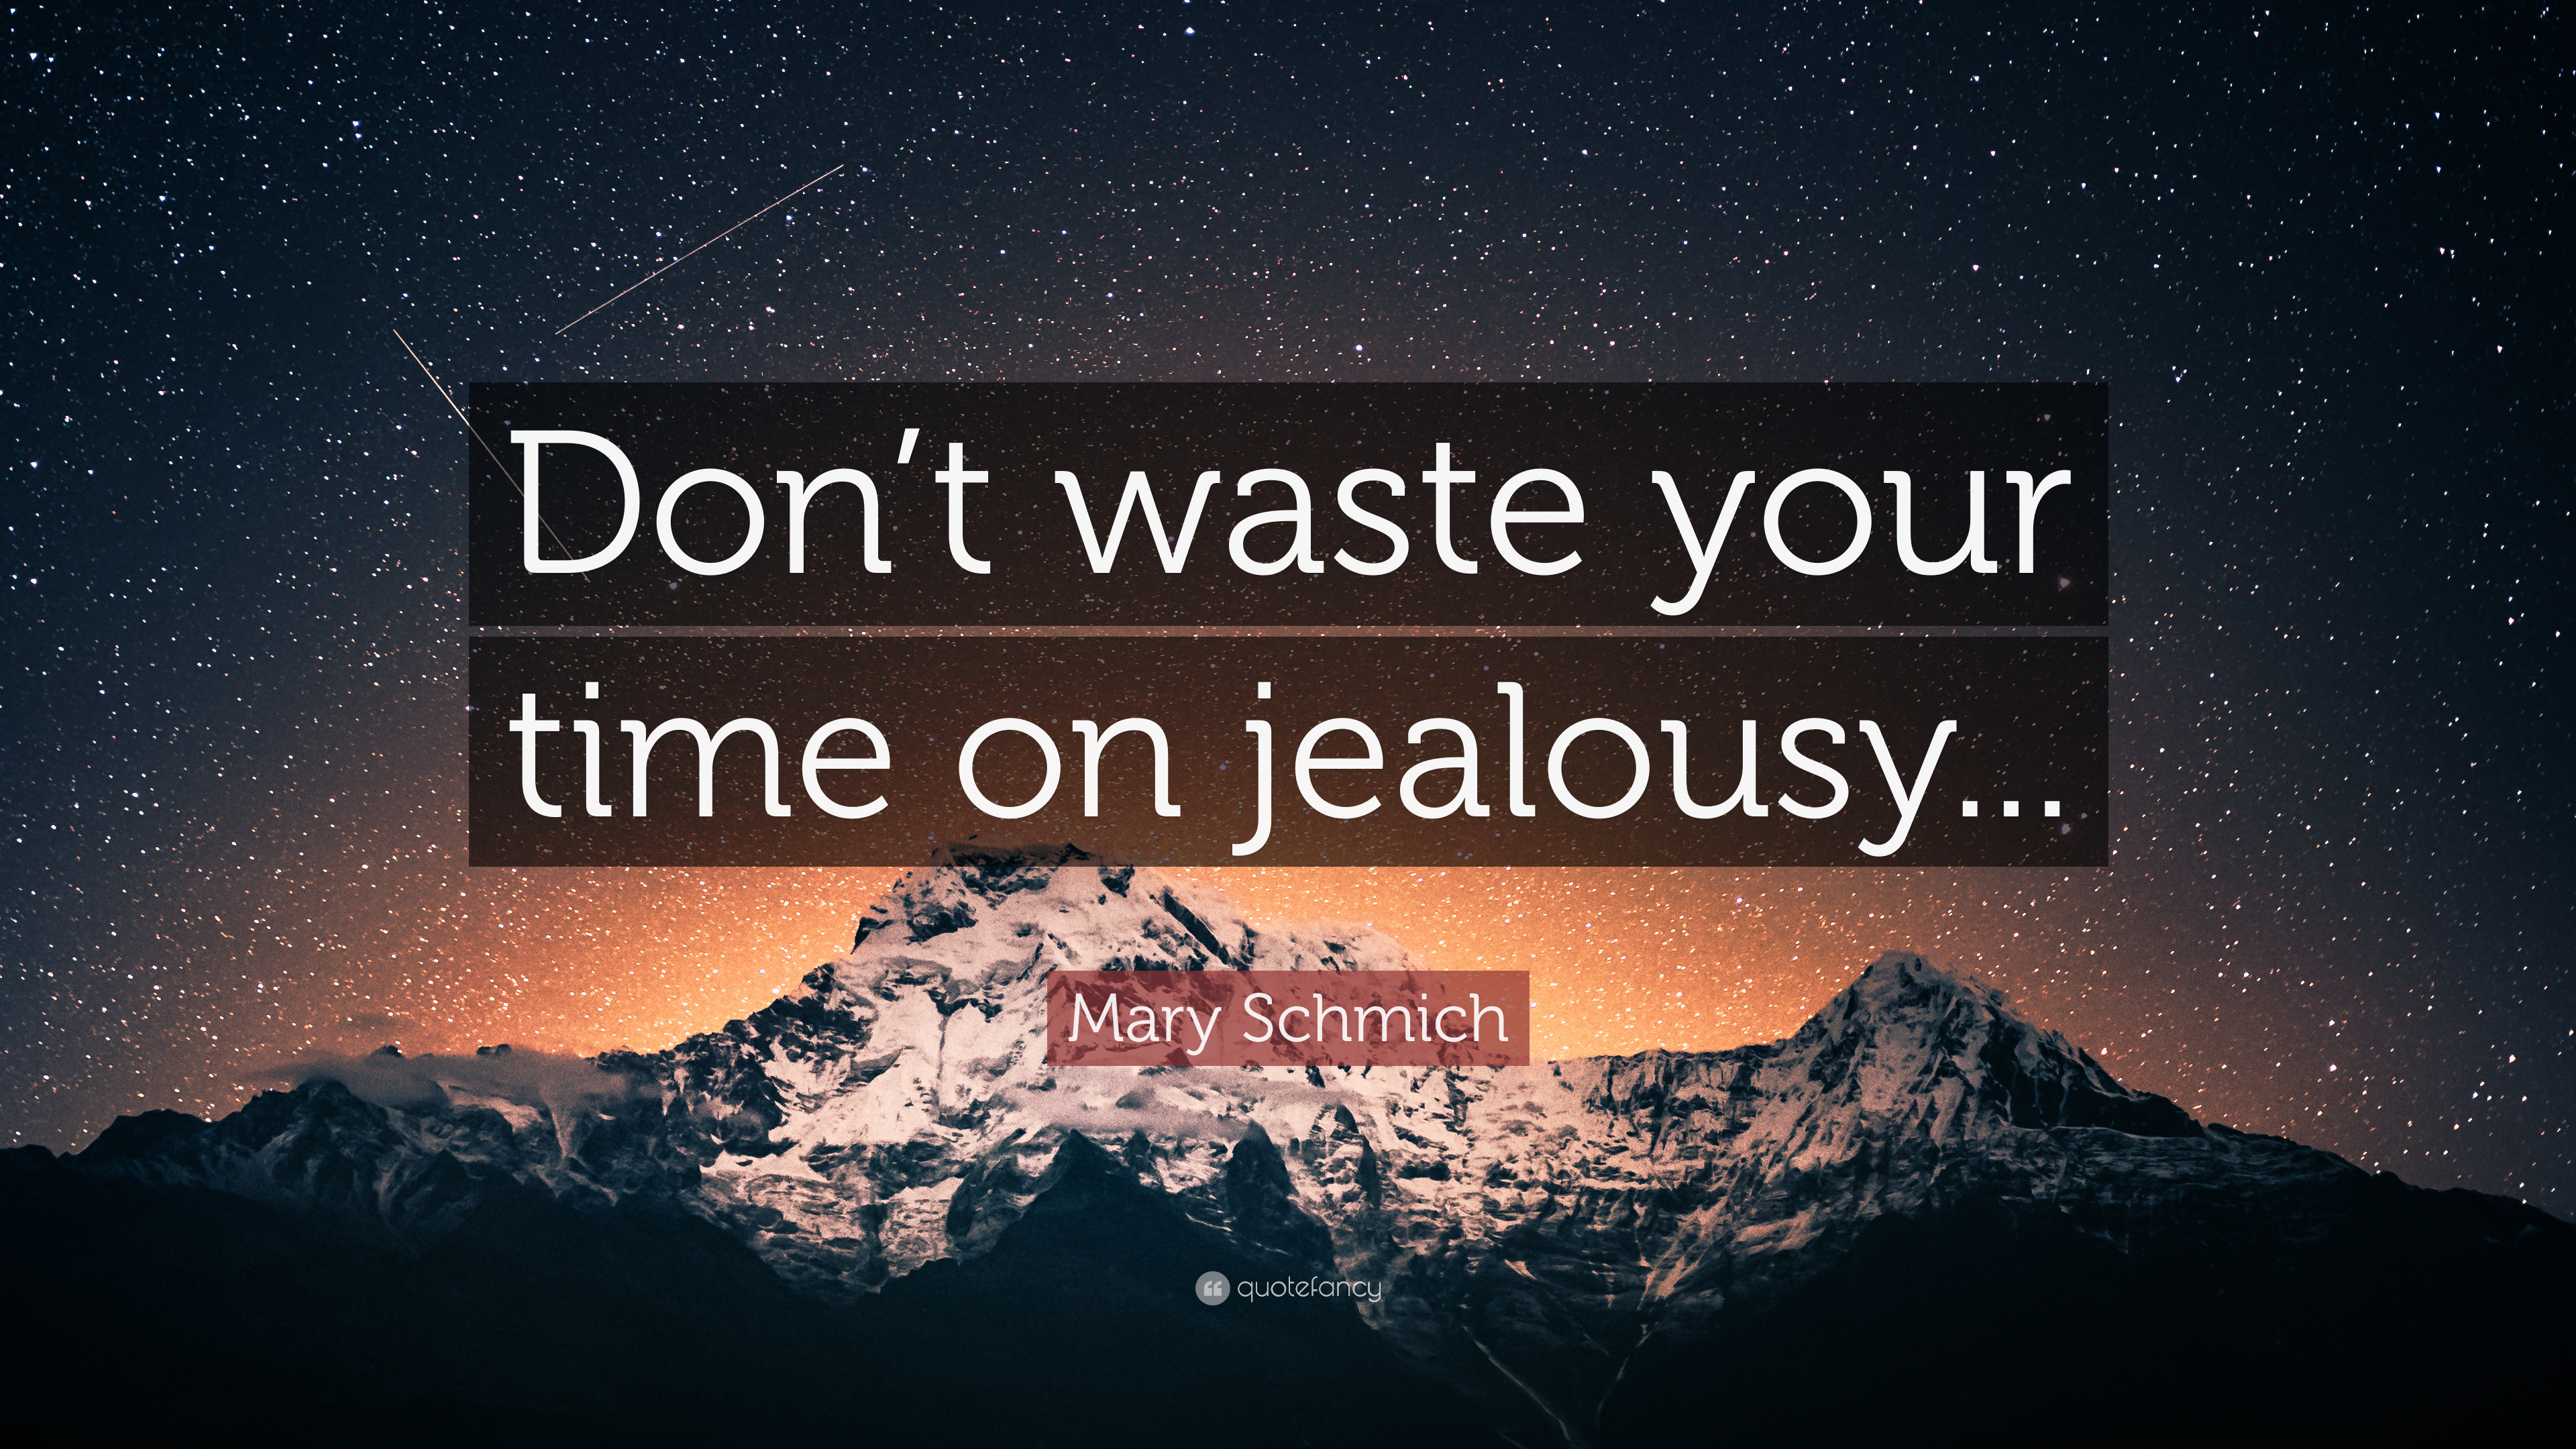 Mary Schmich Quote: “Don't waste your time on jealousy.”